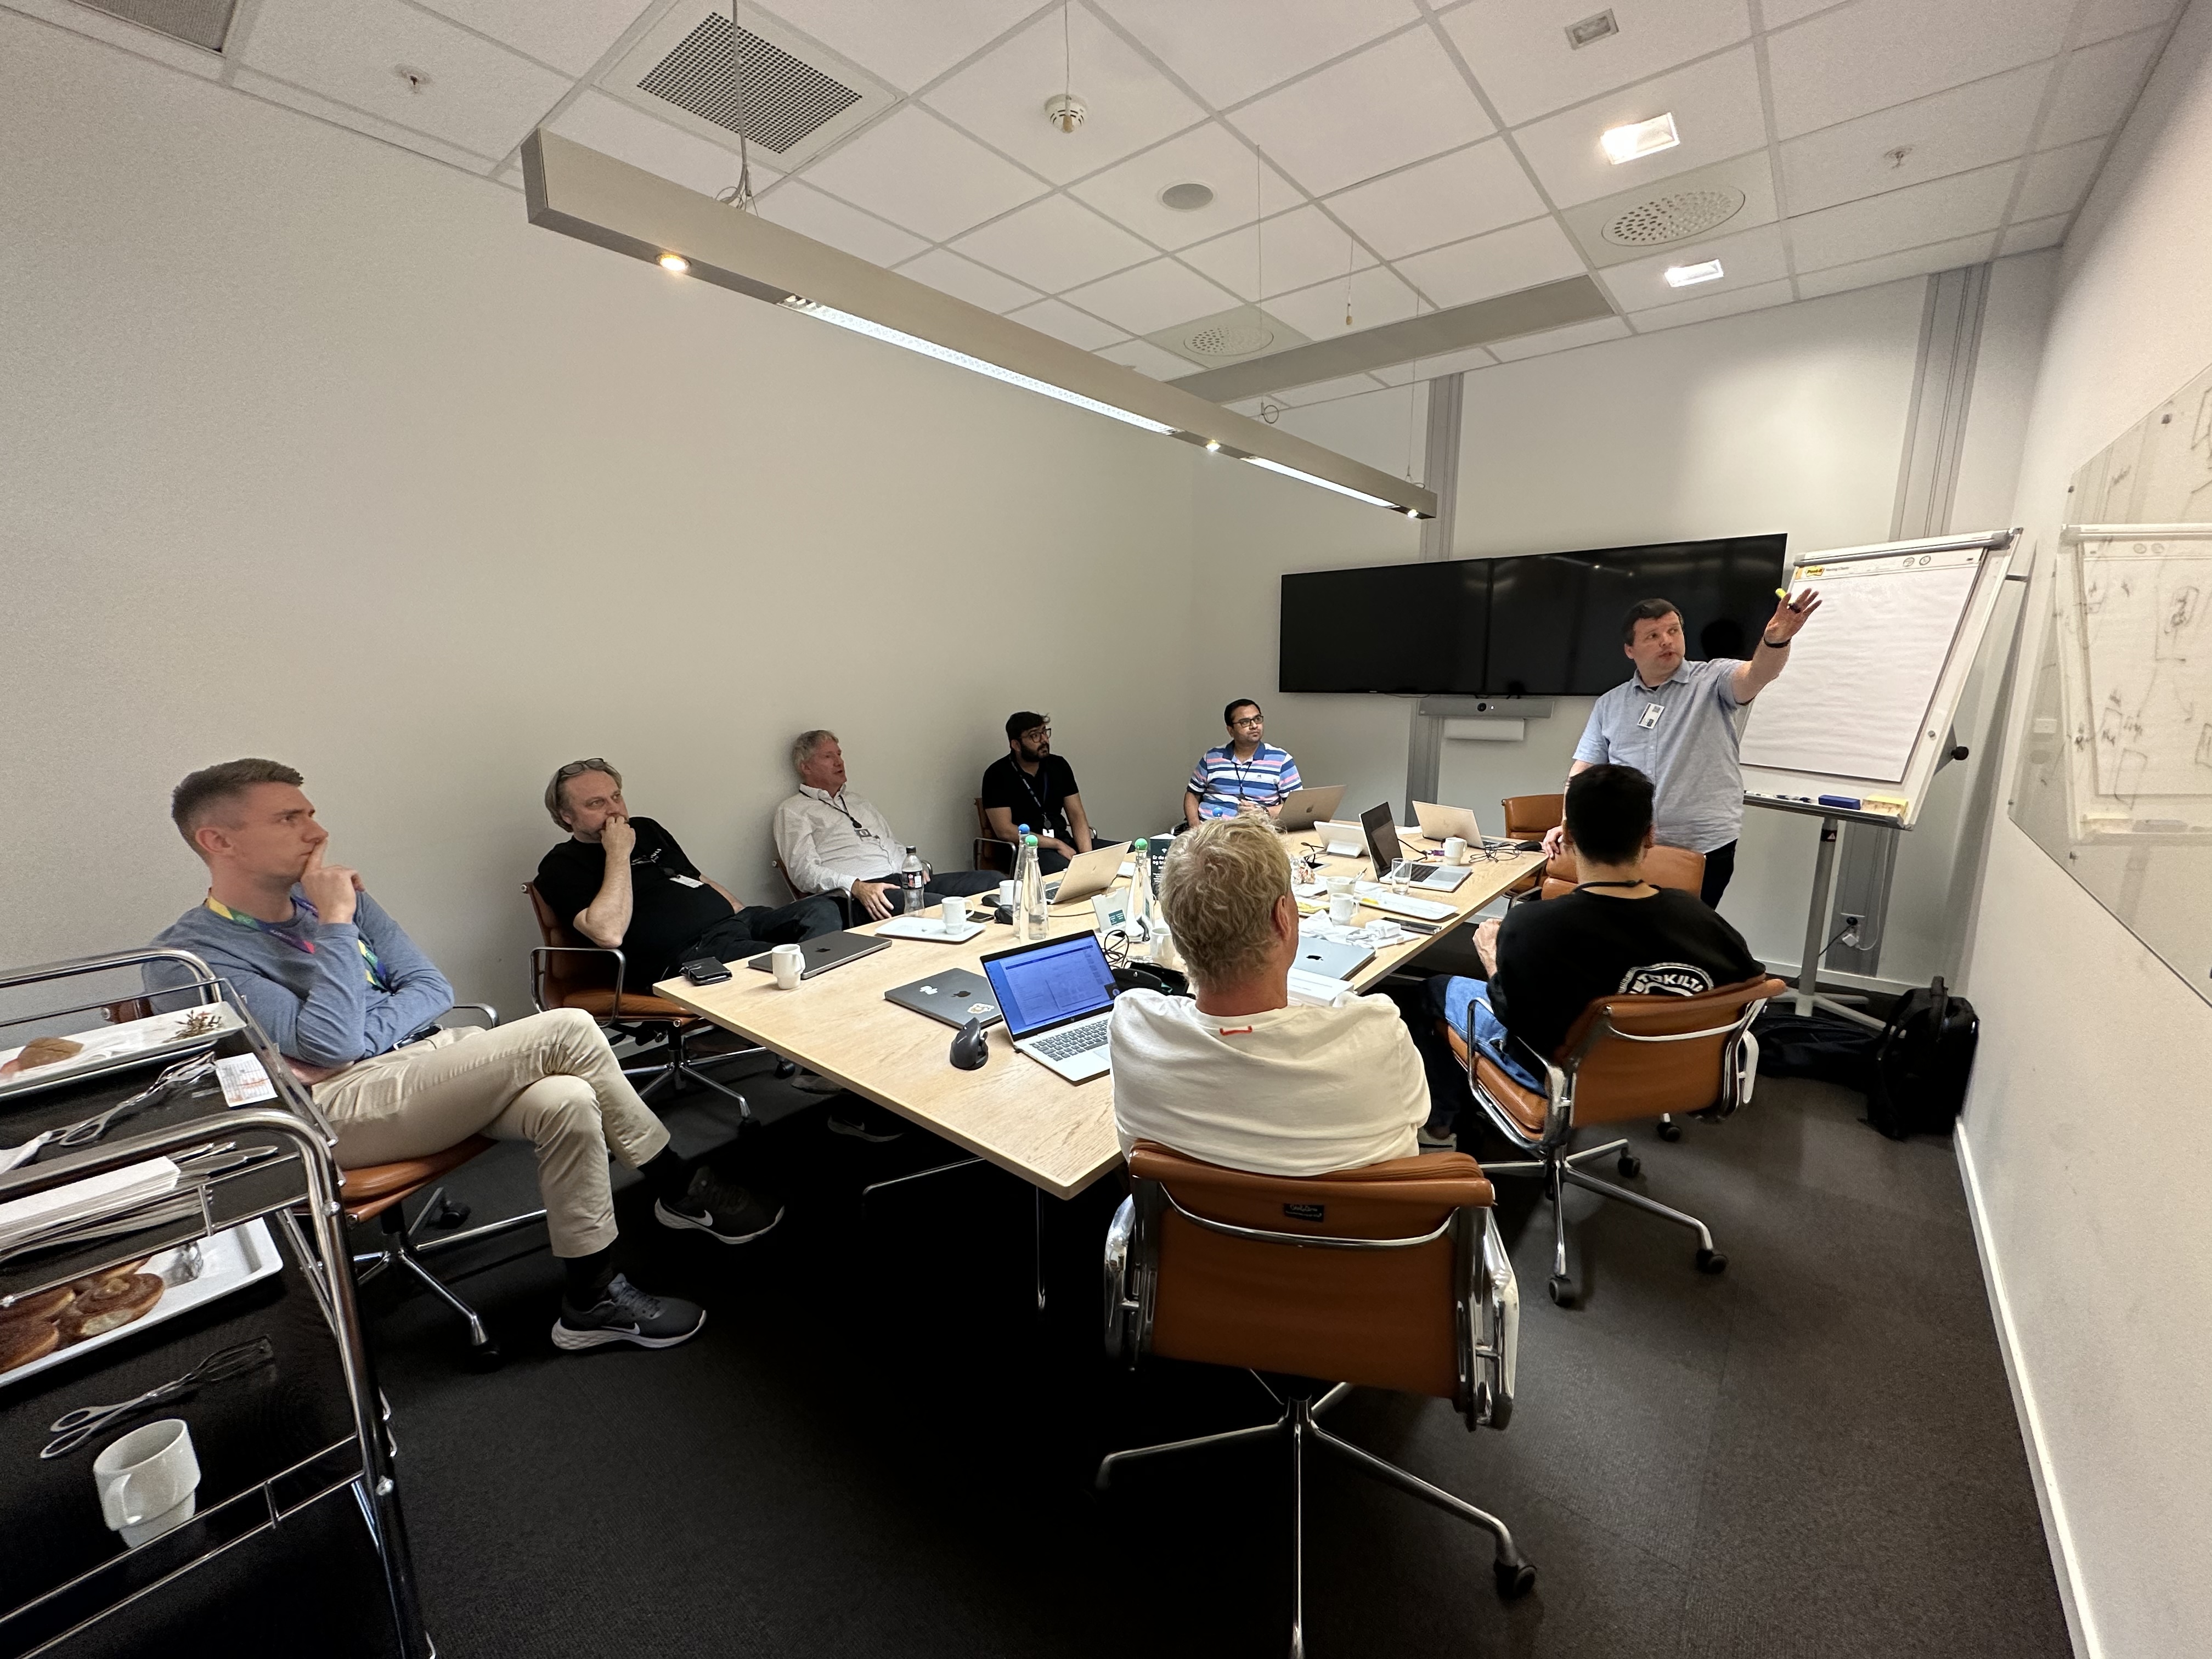 Tom De Wolf presenting for the DNB team in Oslo